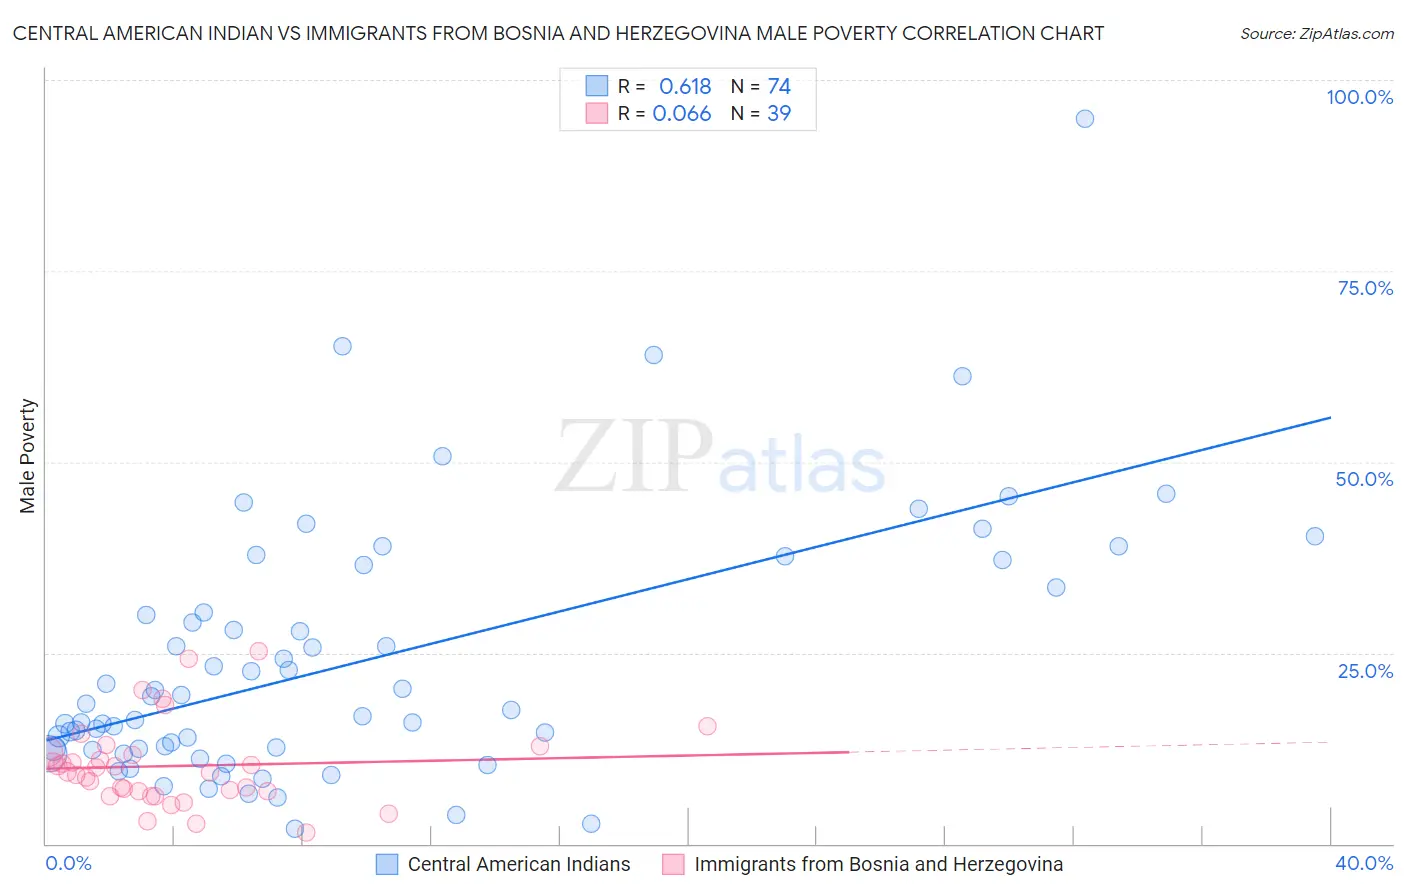 Central American Indian vs Immigrants from Bosnia and Herzegovina Male Poverty